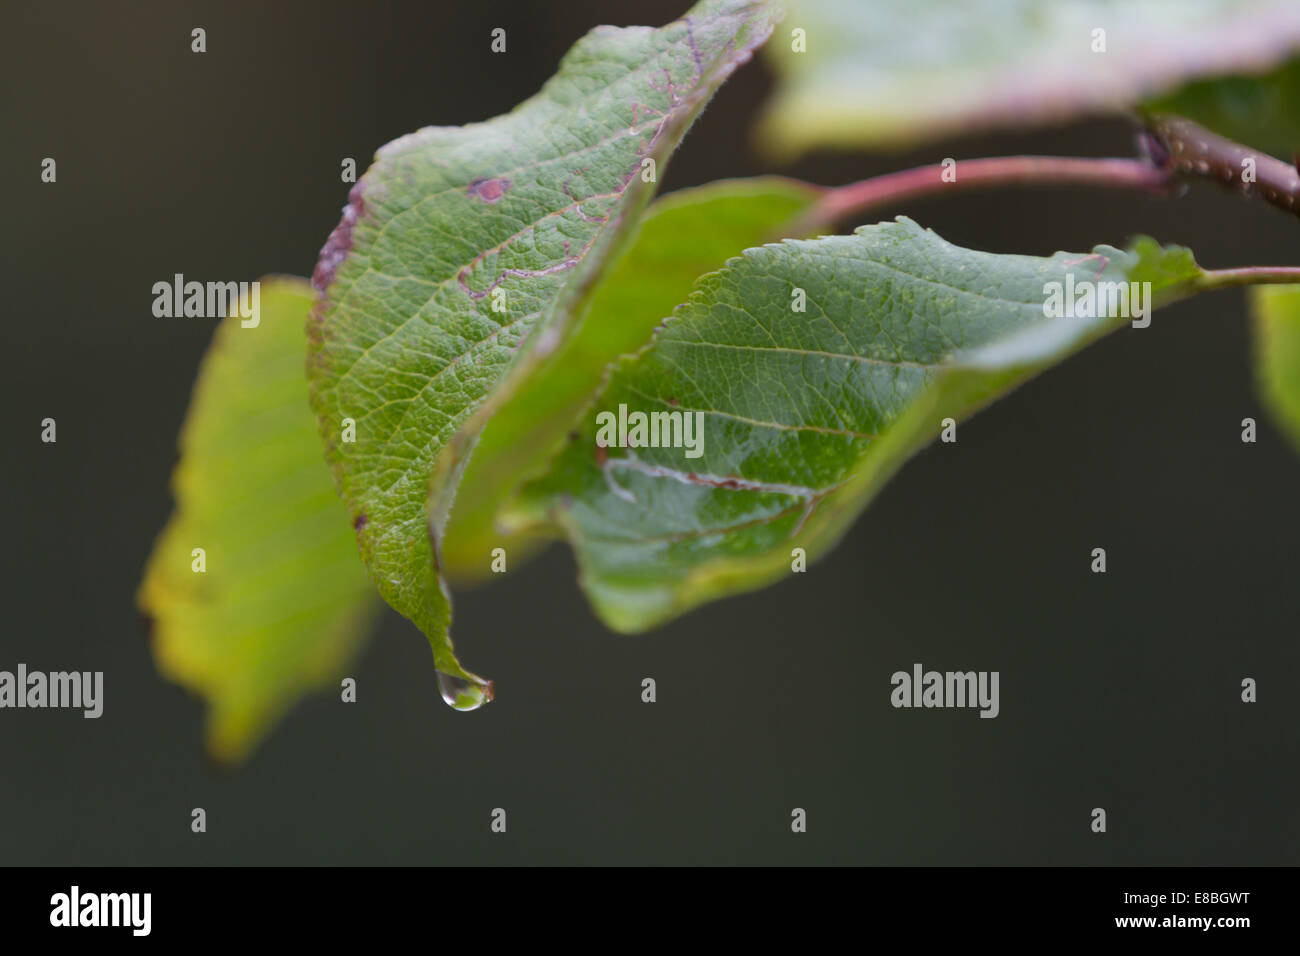 Raindrop hanging from apple tree leaf; blurred grey/gray background Stock Photo